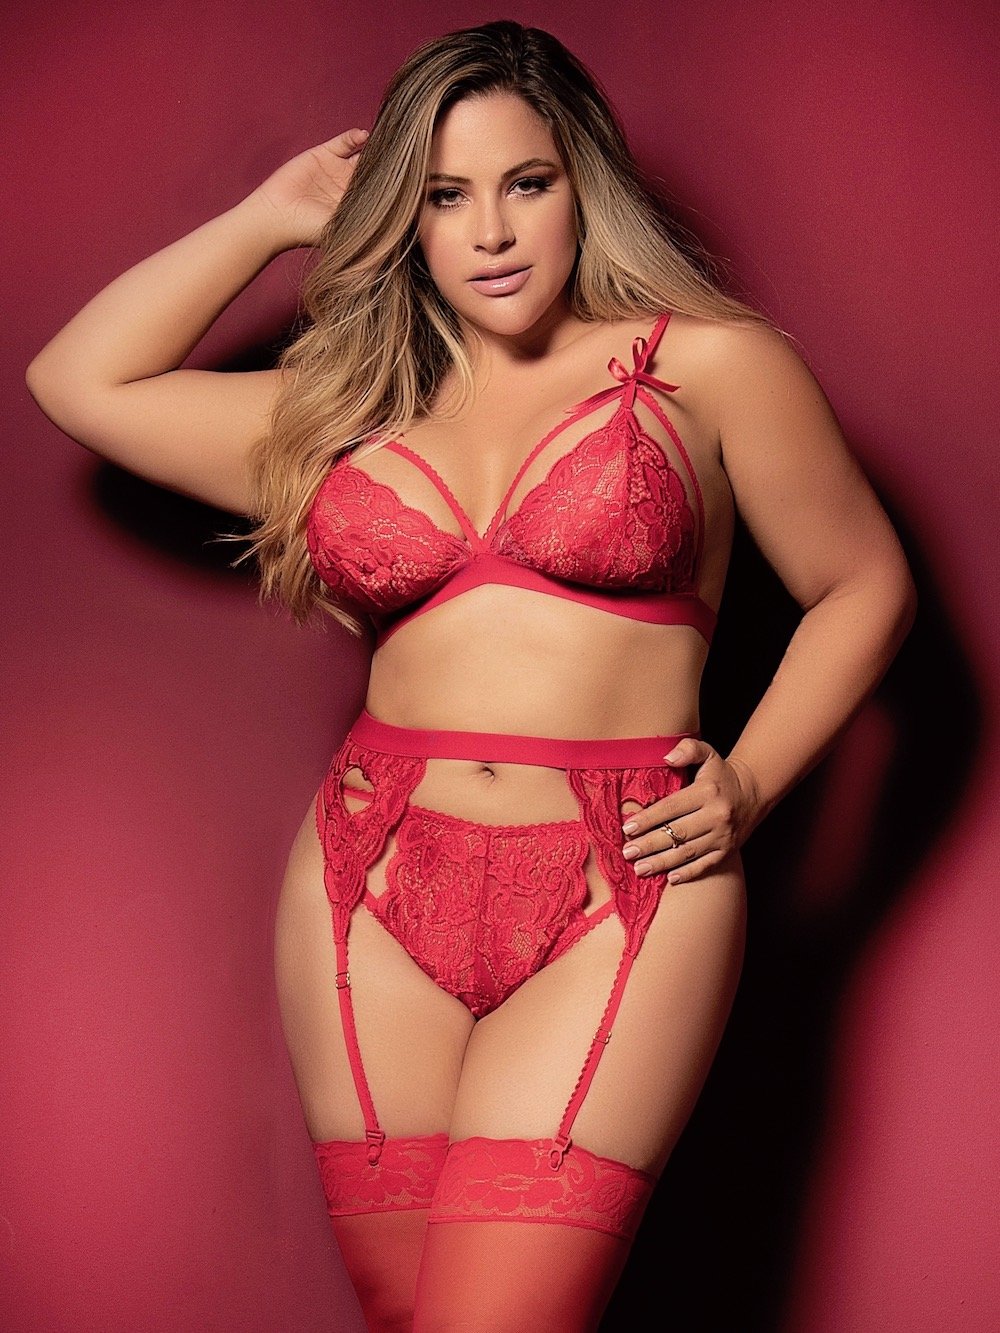 Plus Size Lingerie, Women Crotchless Lingerie, Sexy Babydoll and Teddy Tagged